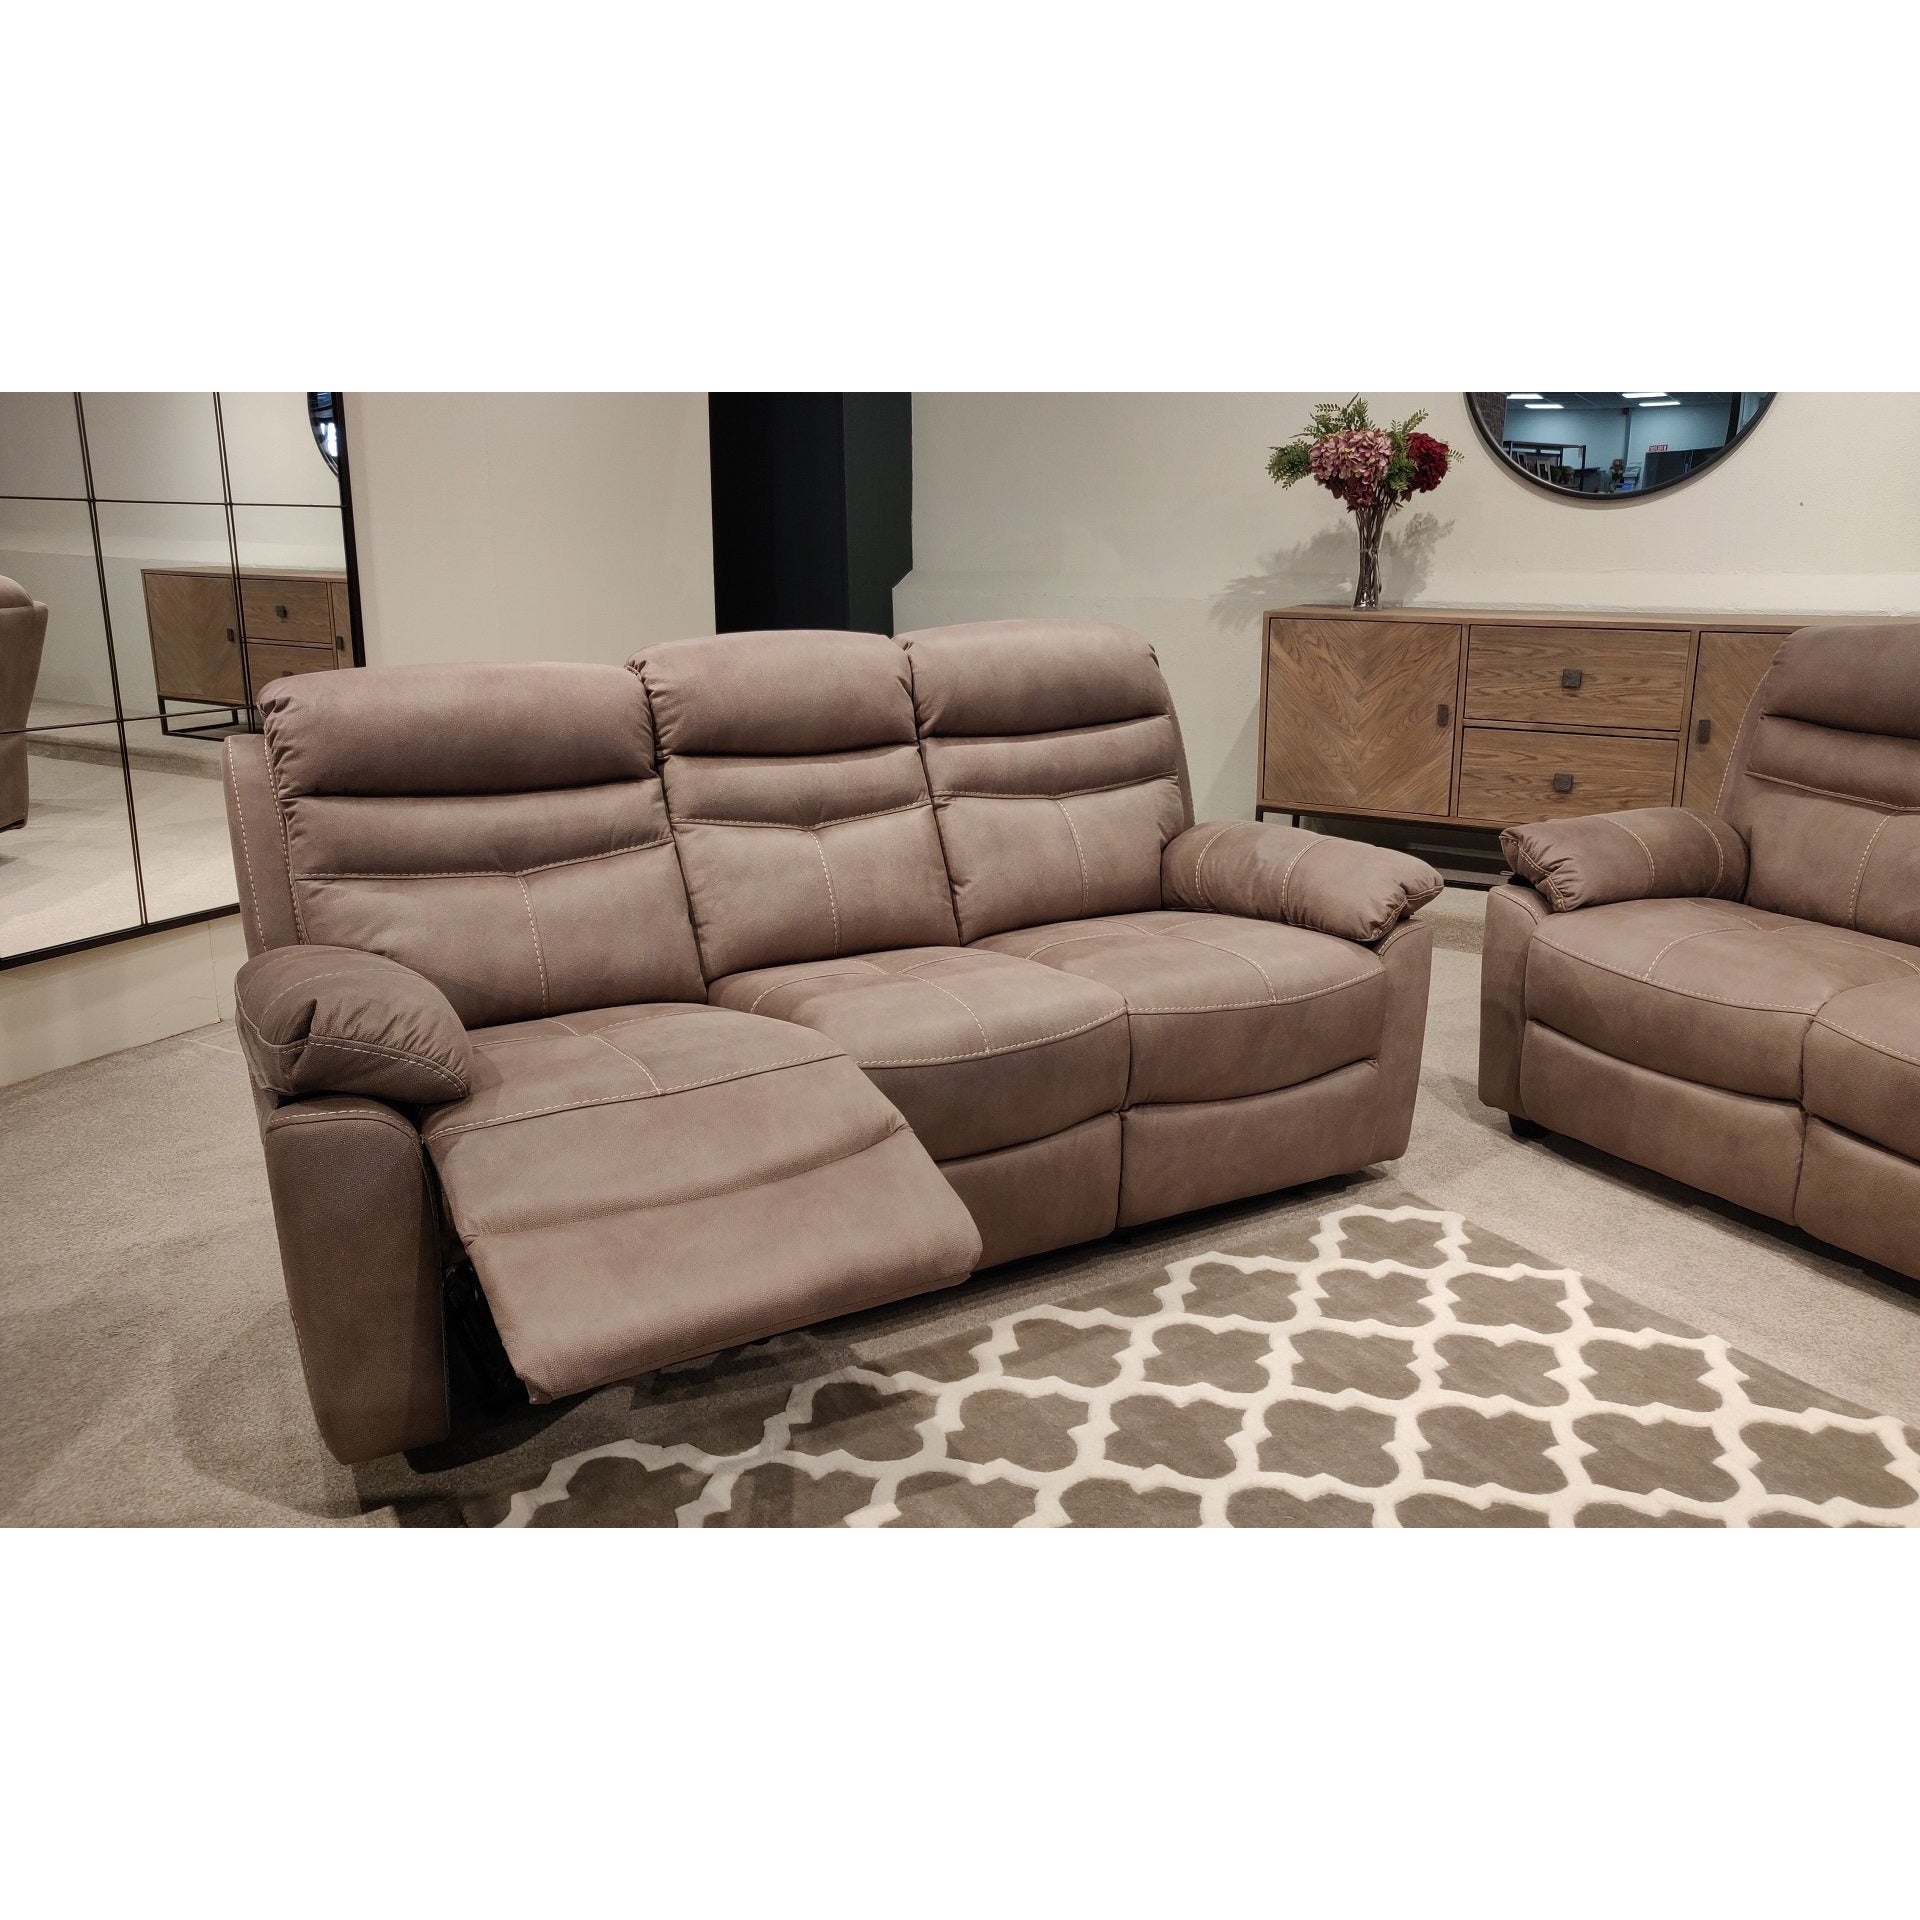 Lucy 3 Seater Recliner Pecan from Upstairs Downstairs Furniture in Lisburn, Monaghan and Enniskillen